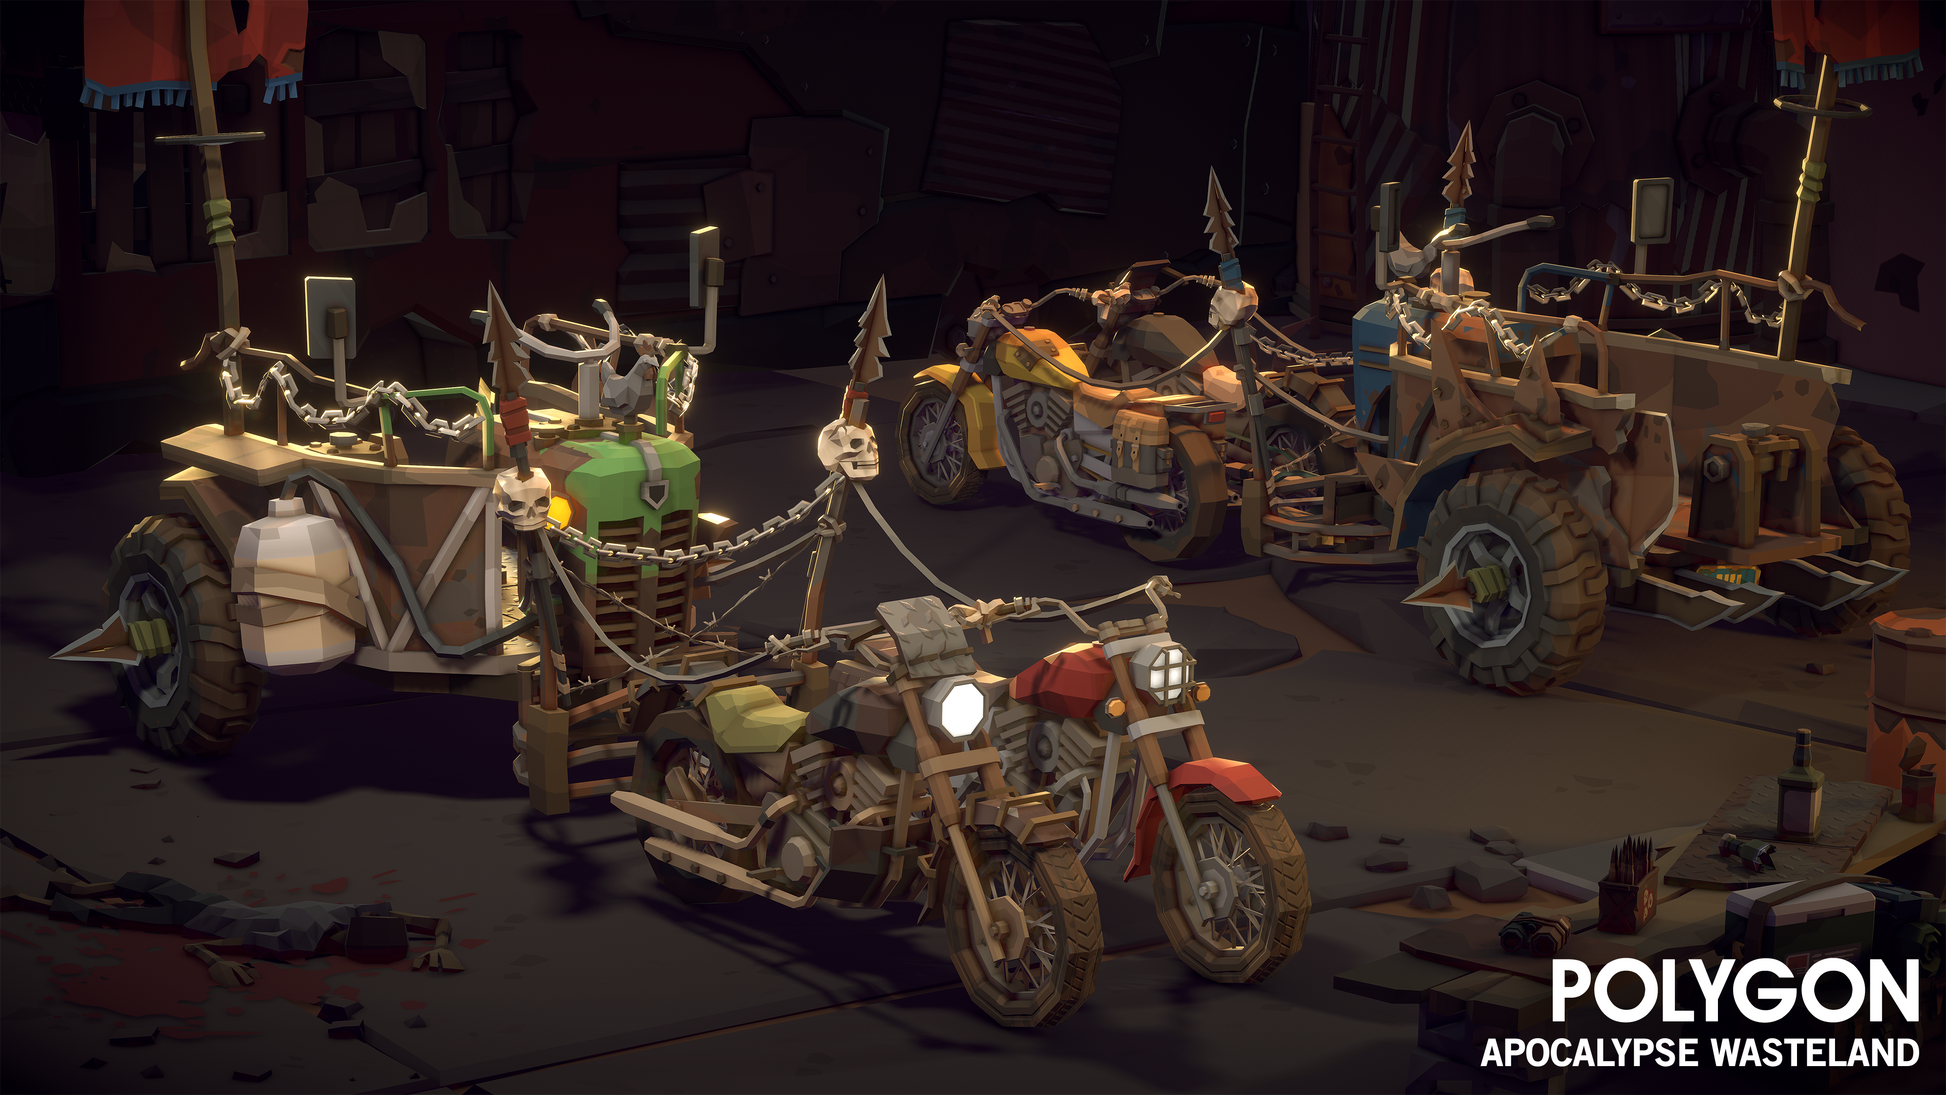 Two apocalyptic motorbikes with scavanged trailers attached to them parked in a garage